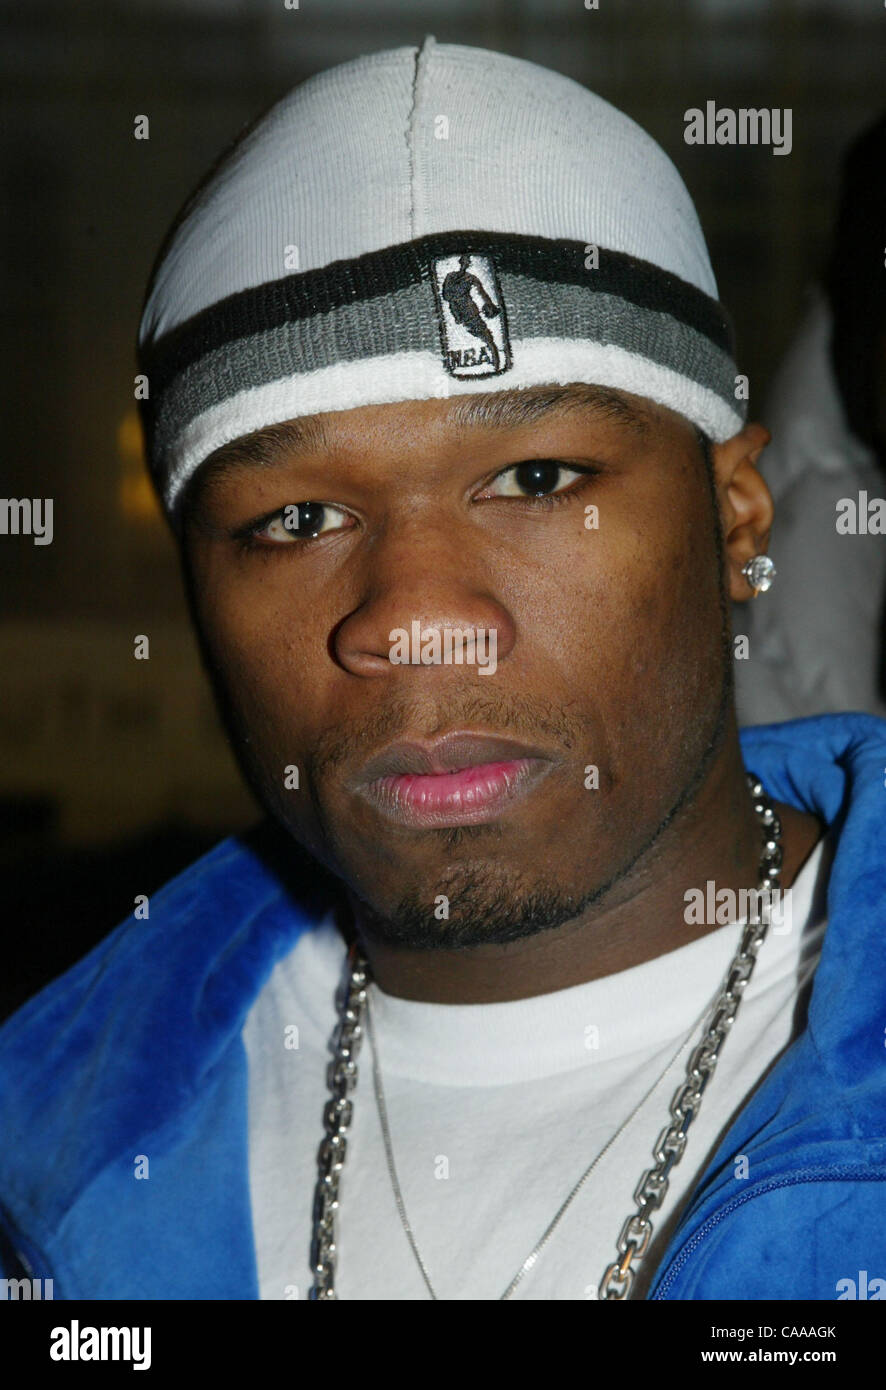 Jan 03, 2003 - New York, New York, USA - Rapper 50 CENT, his real name ...